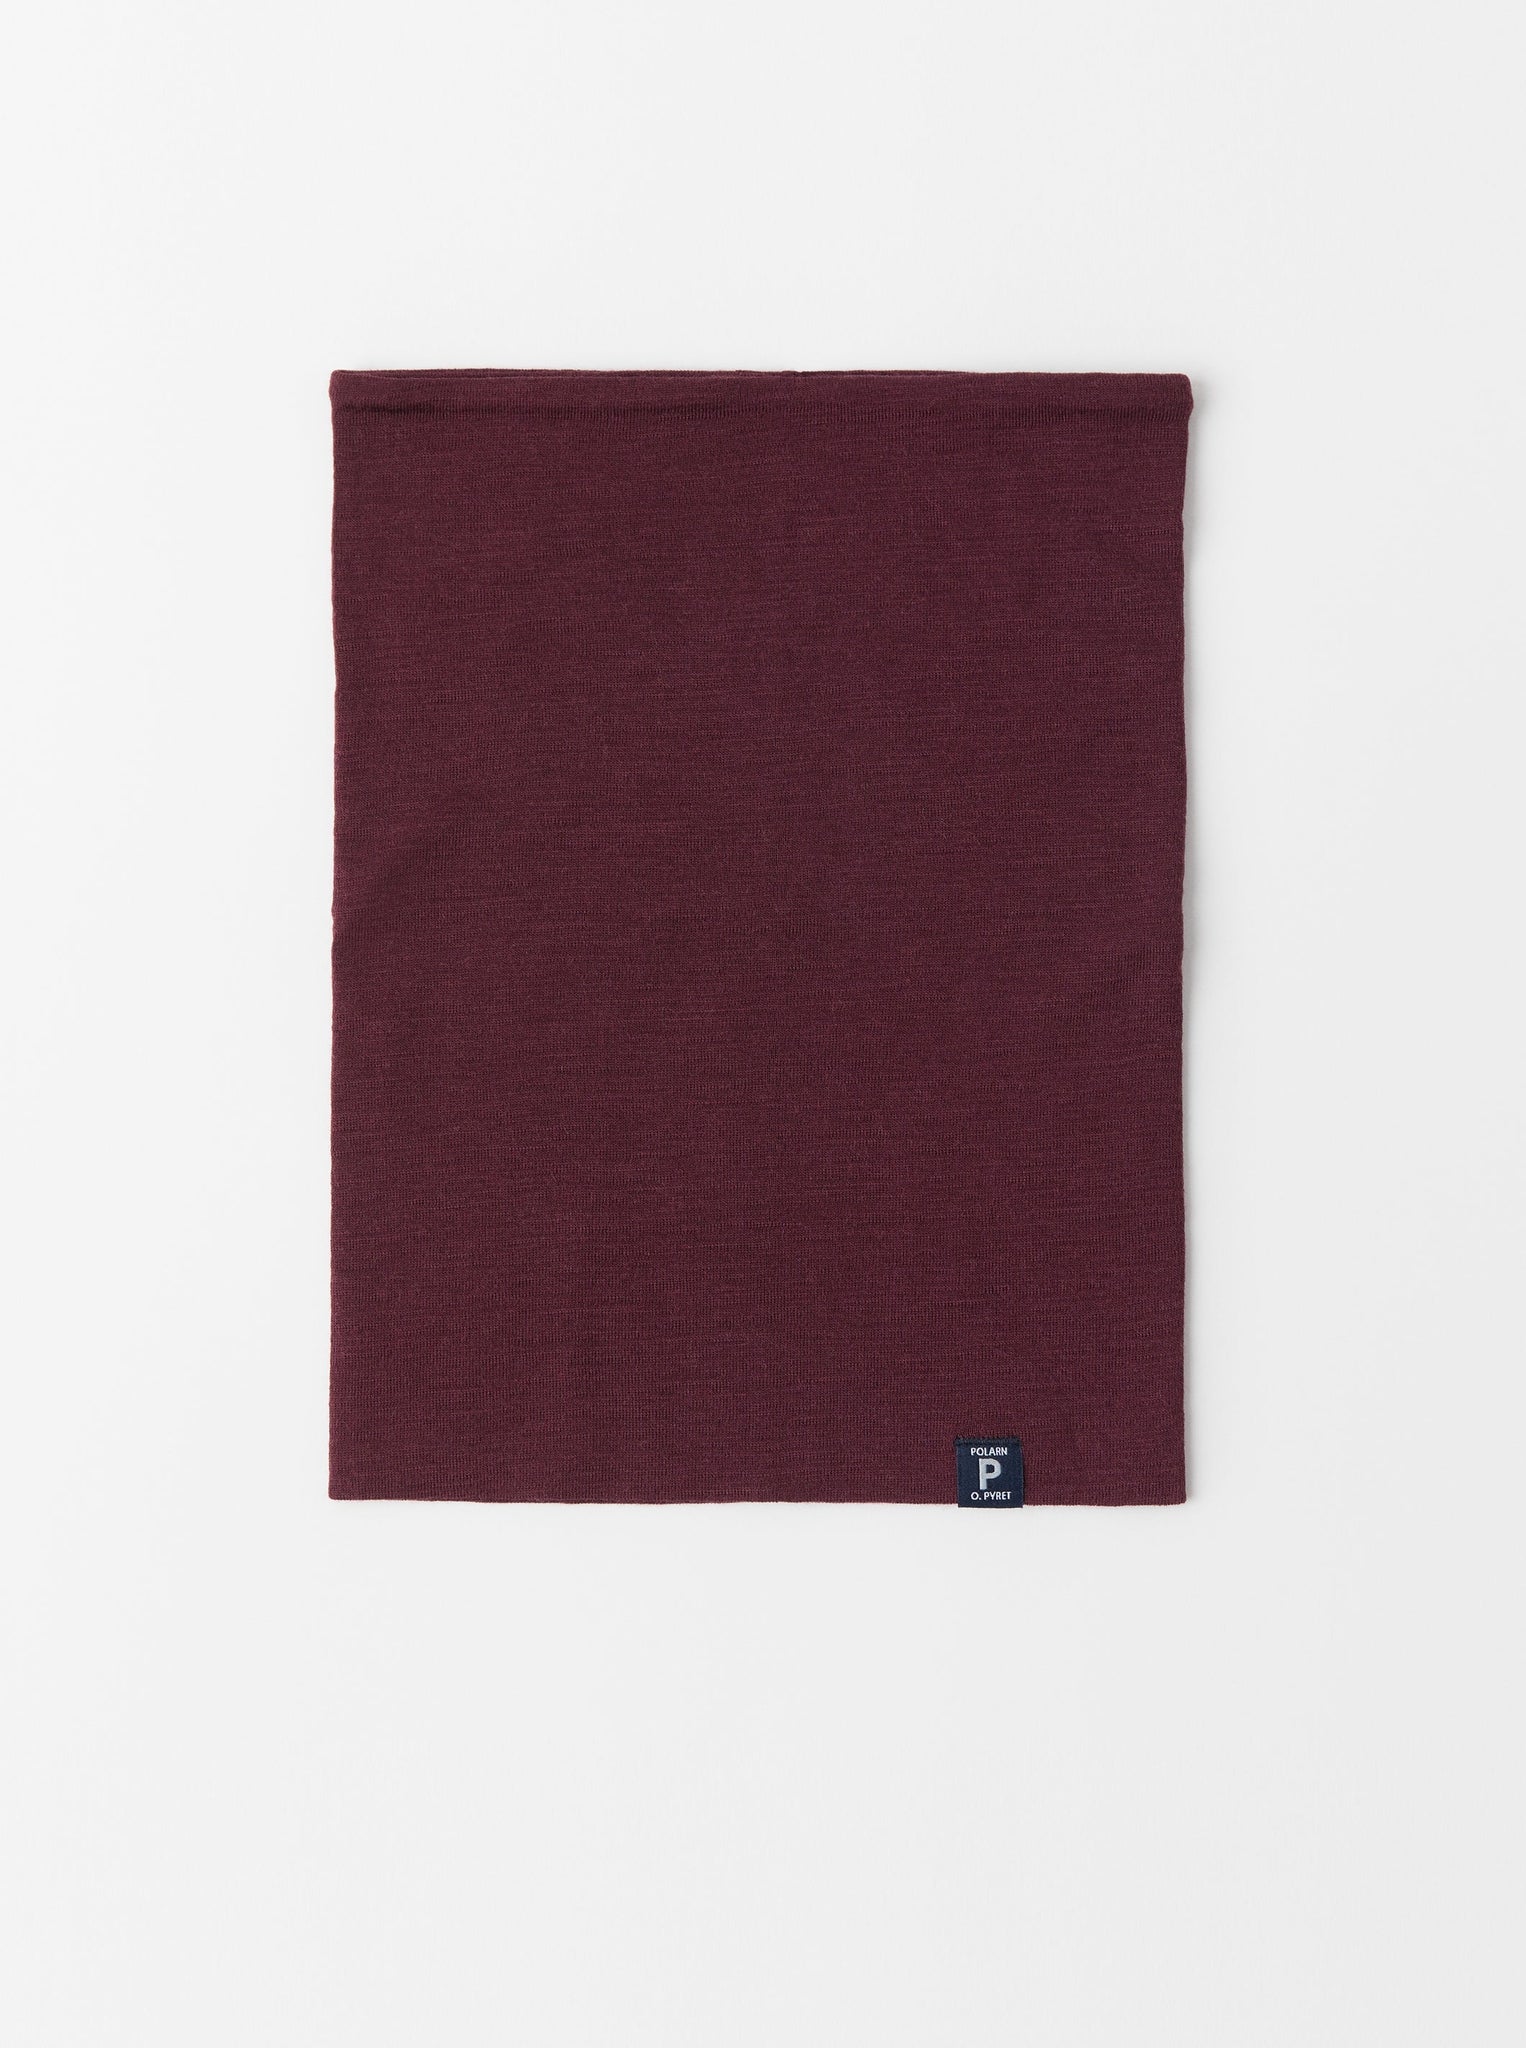 Merino Wool Burgundy Kids Snood from the Polarn O. Pyret kidswear collection. The best ethical kids outerwear.